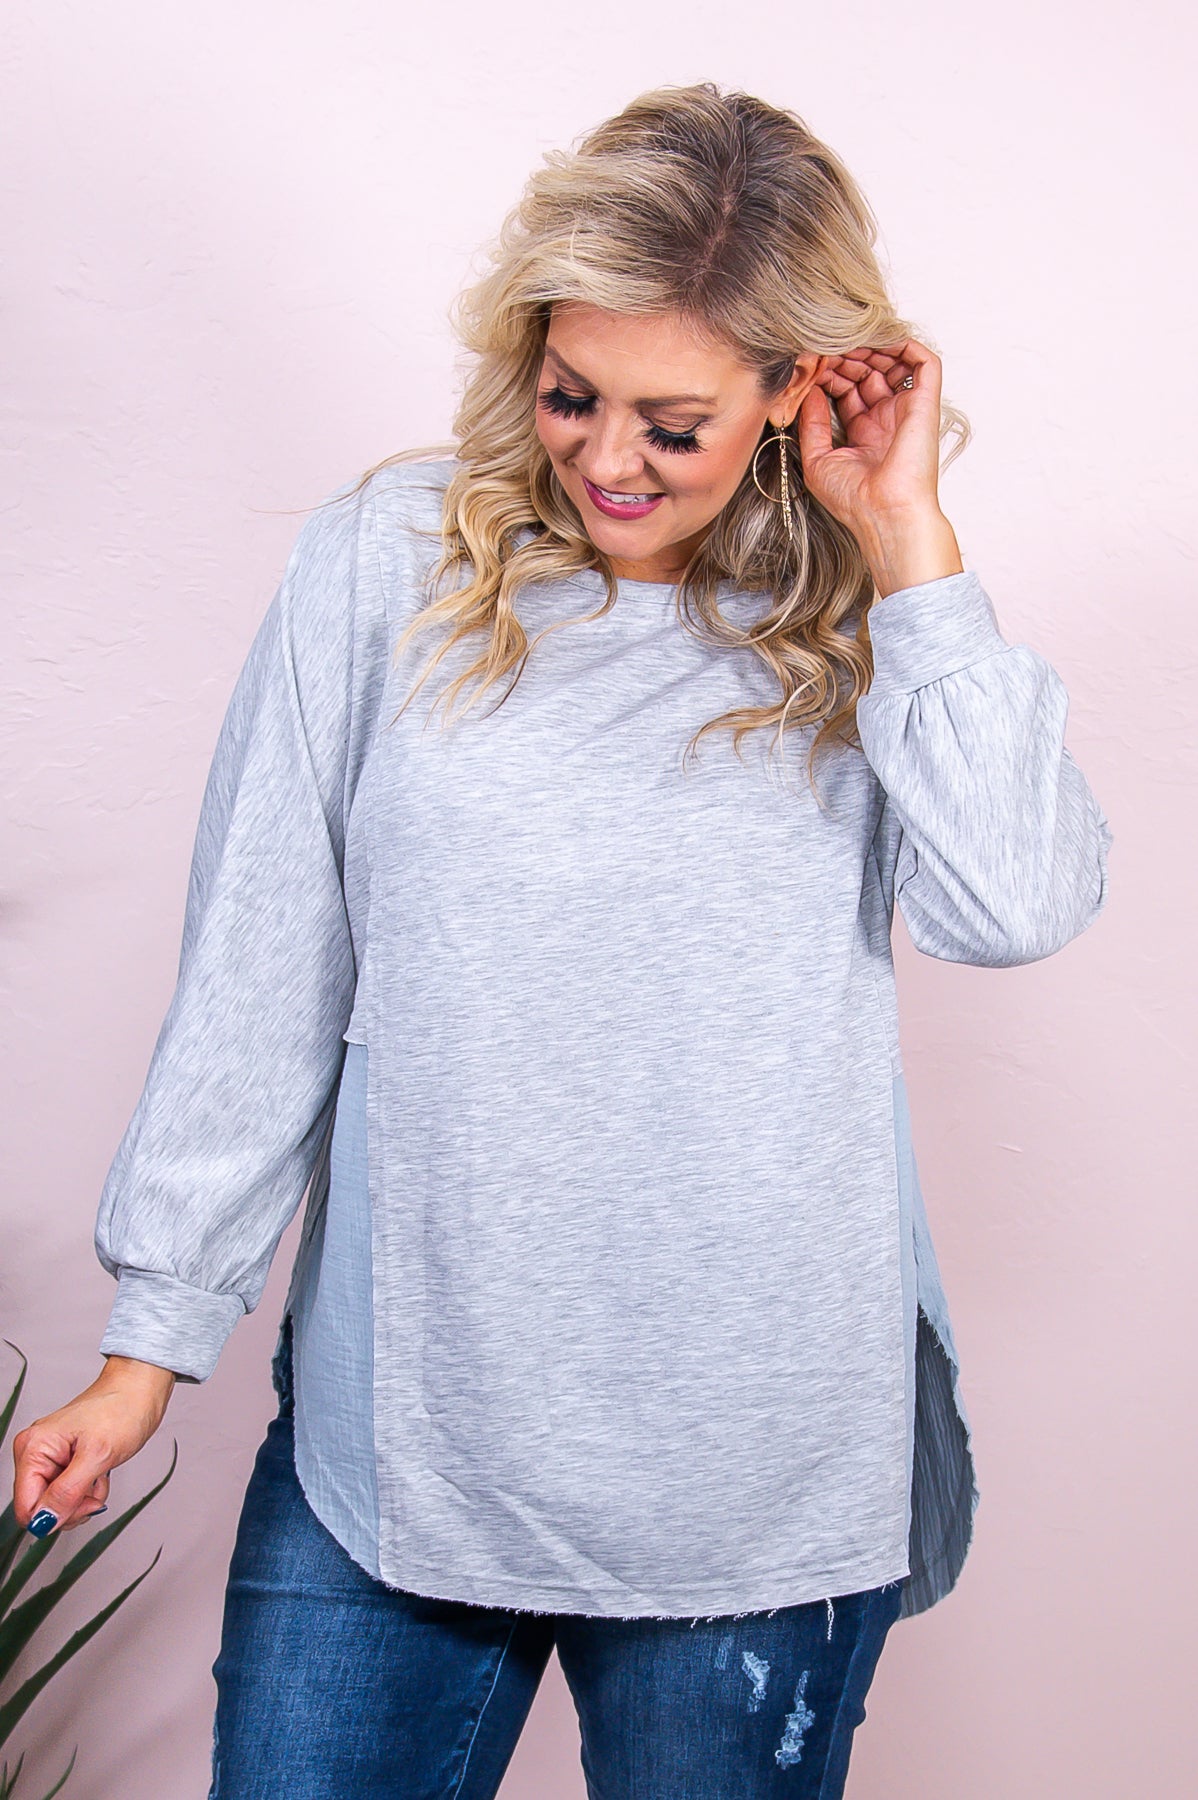 Kindness Over Everything Heather Gray/Light Blue High-Low Top - T8263HGR